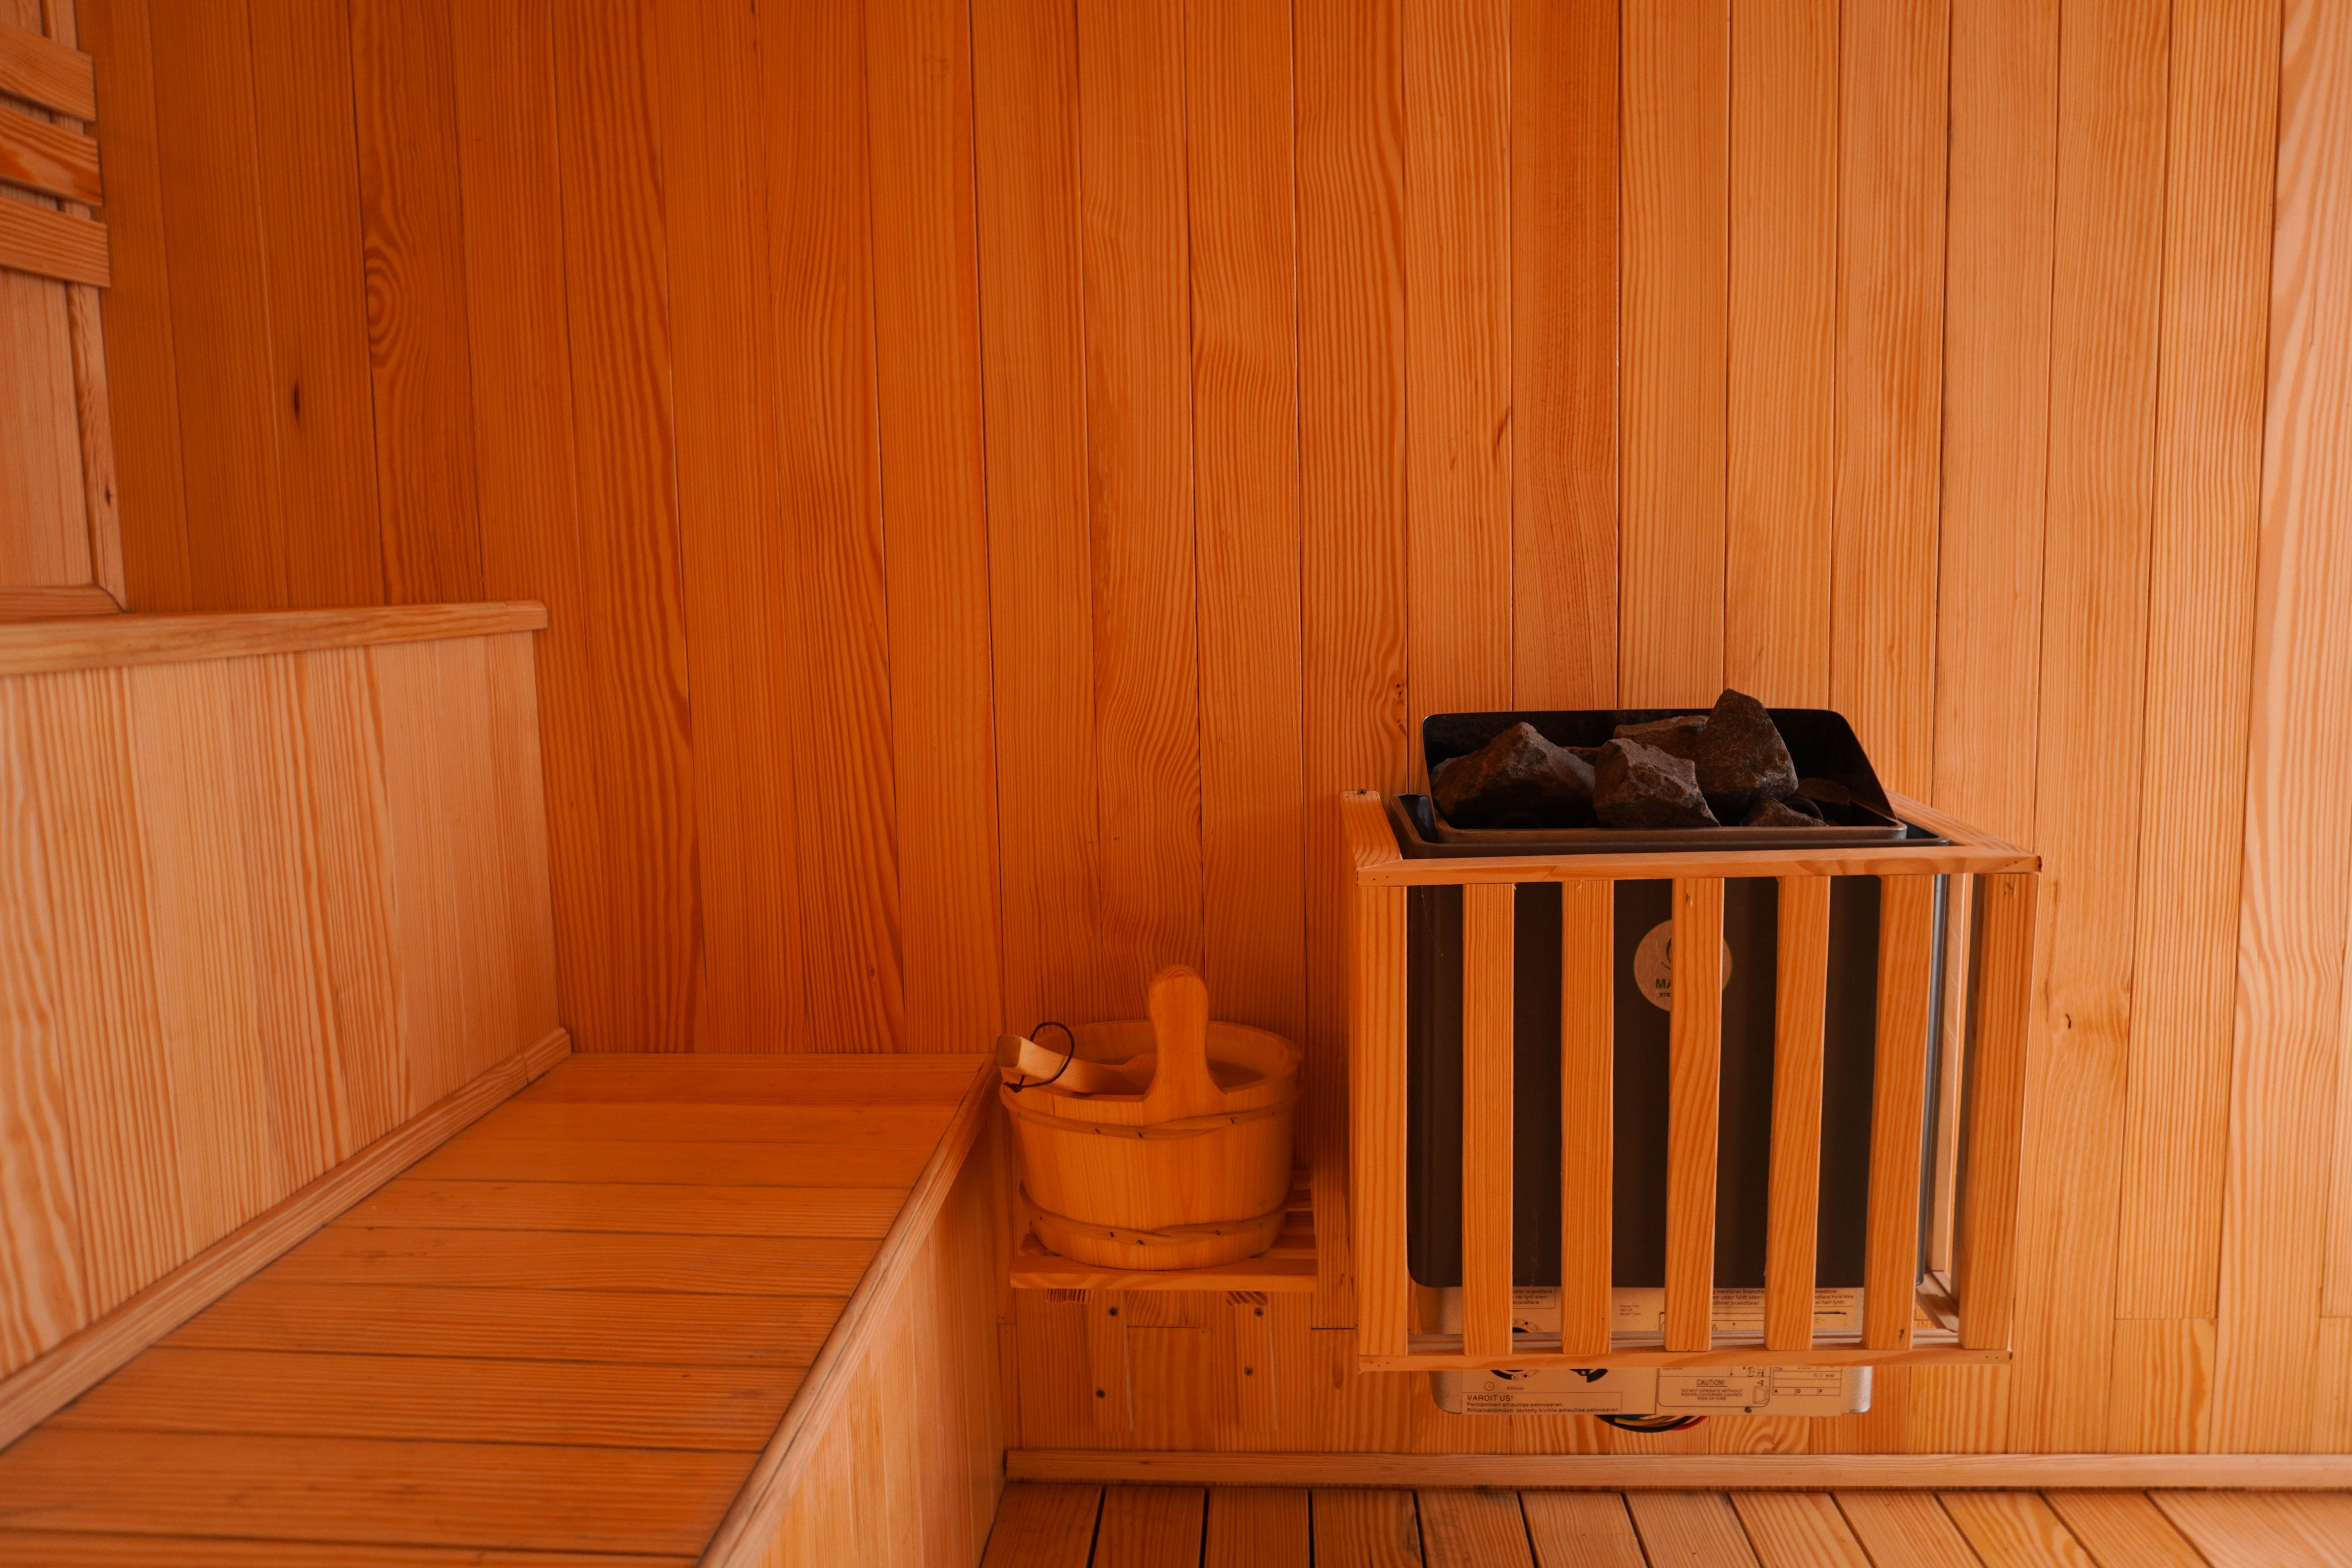 Sauna use may lower risk for stroke 